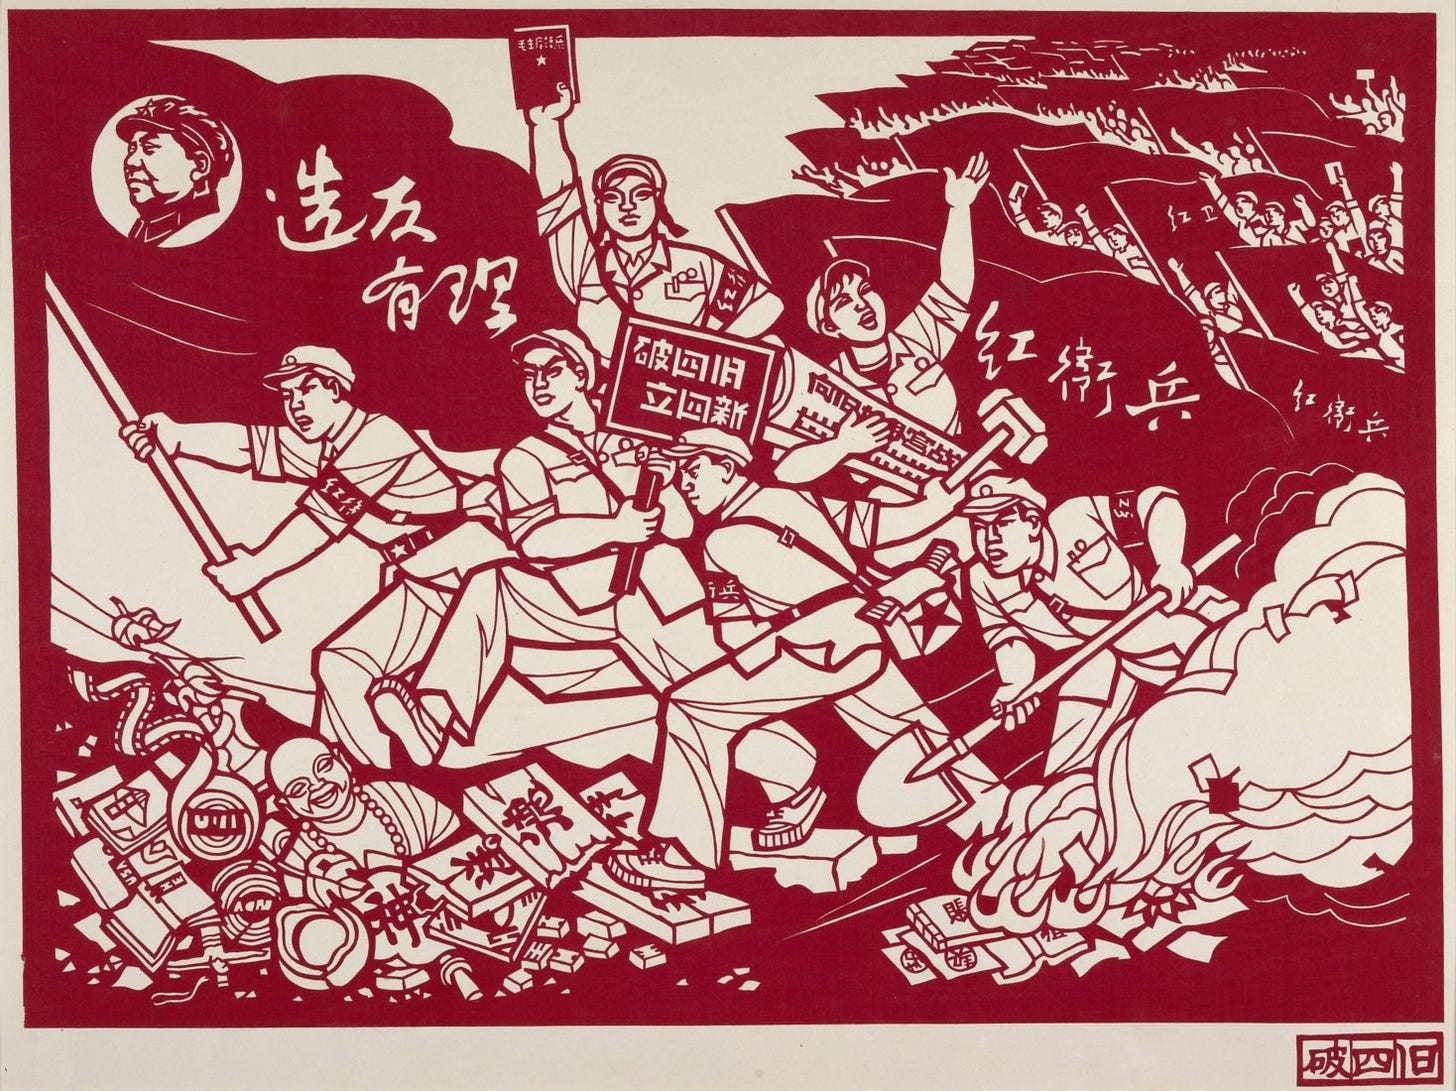 High Resolution classic Mao propaganda poster titled “Eliminate the Four Old, Establish the Four New” dated 1967.